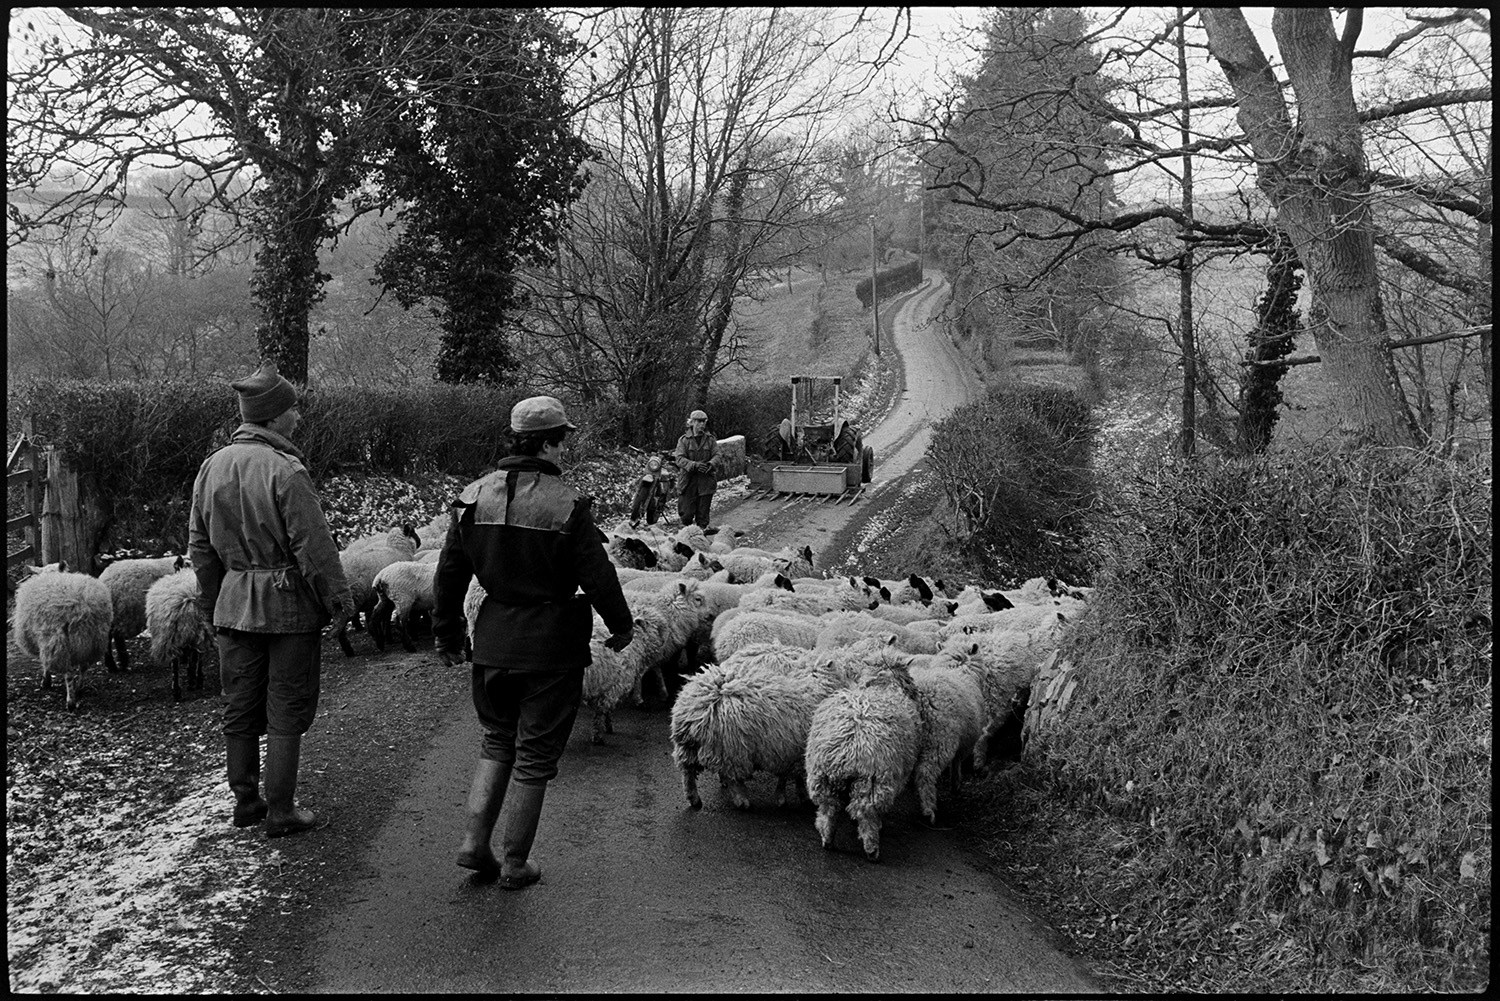 Farmers rounding up and checking sheep in pen. 
[Mr Banbury and two other men herding a flock of sheep into a pen in a field from a road at Westpark, Iddesleigh. There is a light dusting of snow on the ground. And a tractor is parked further down the road.]